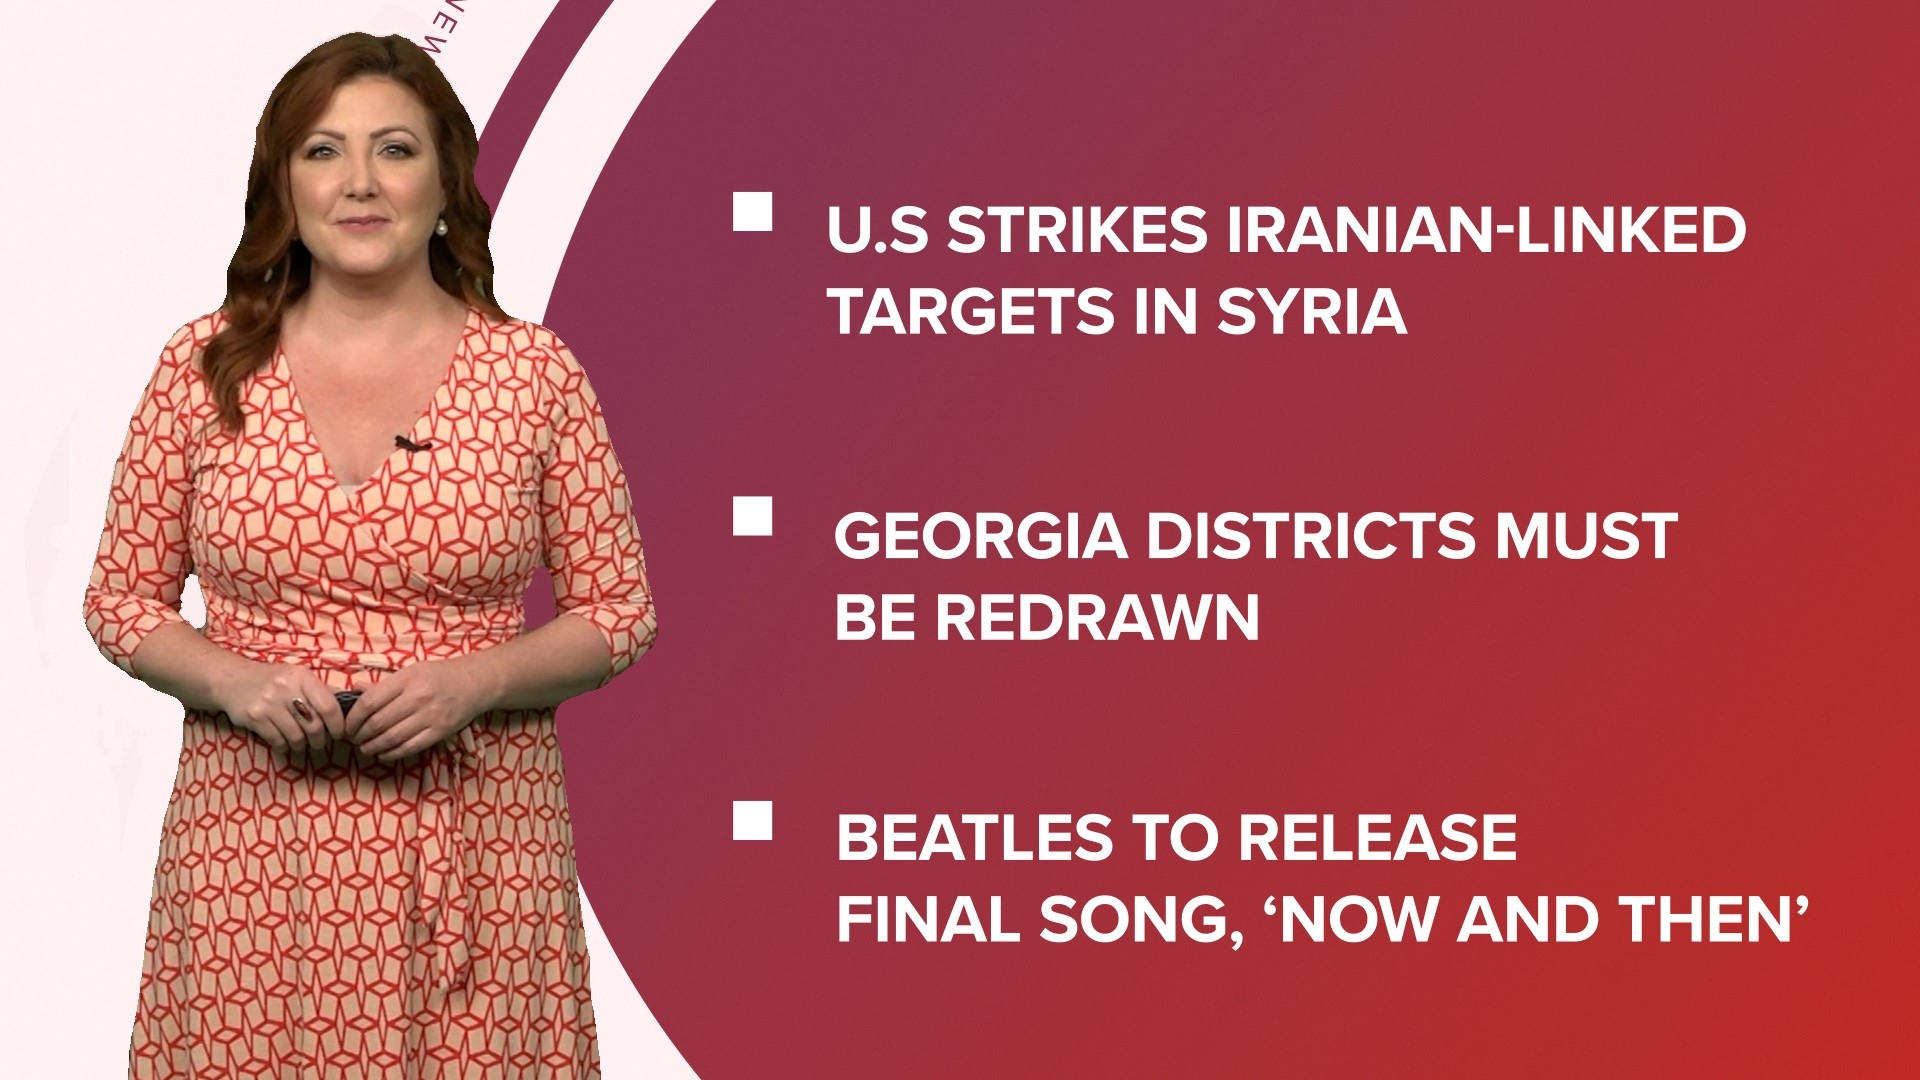 A look at what is happening in the news from the U.S. carrying out airstrikes in Syria to Georgia needing to redraw districts and Taylor Swift's latest album.